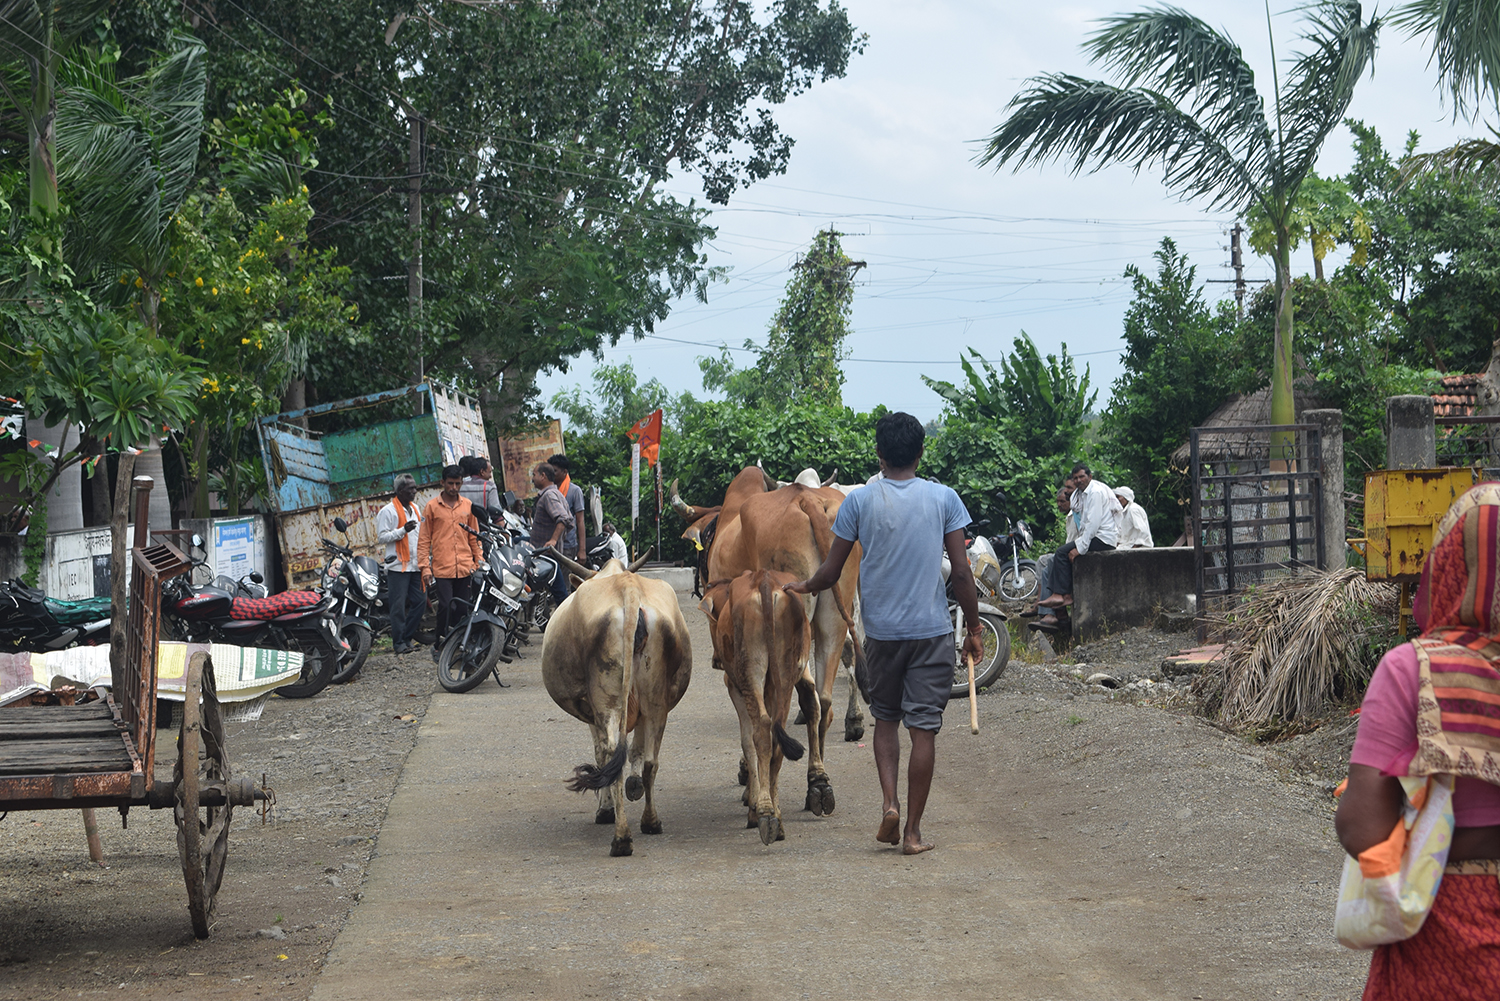 A photo of a man walking on a road with livestock